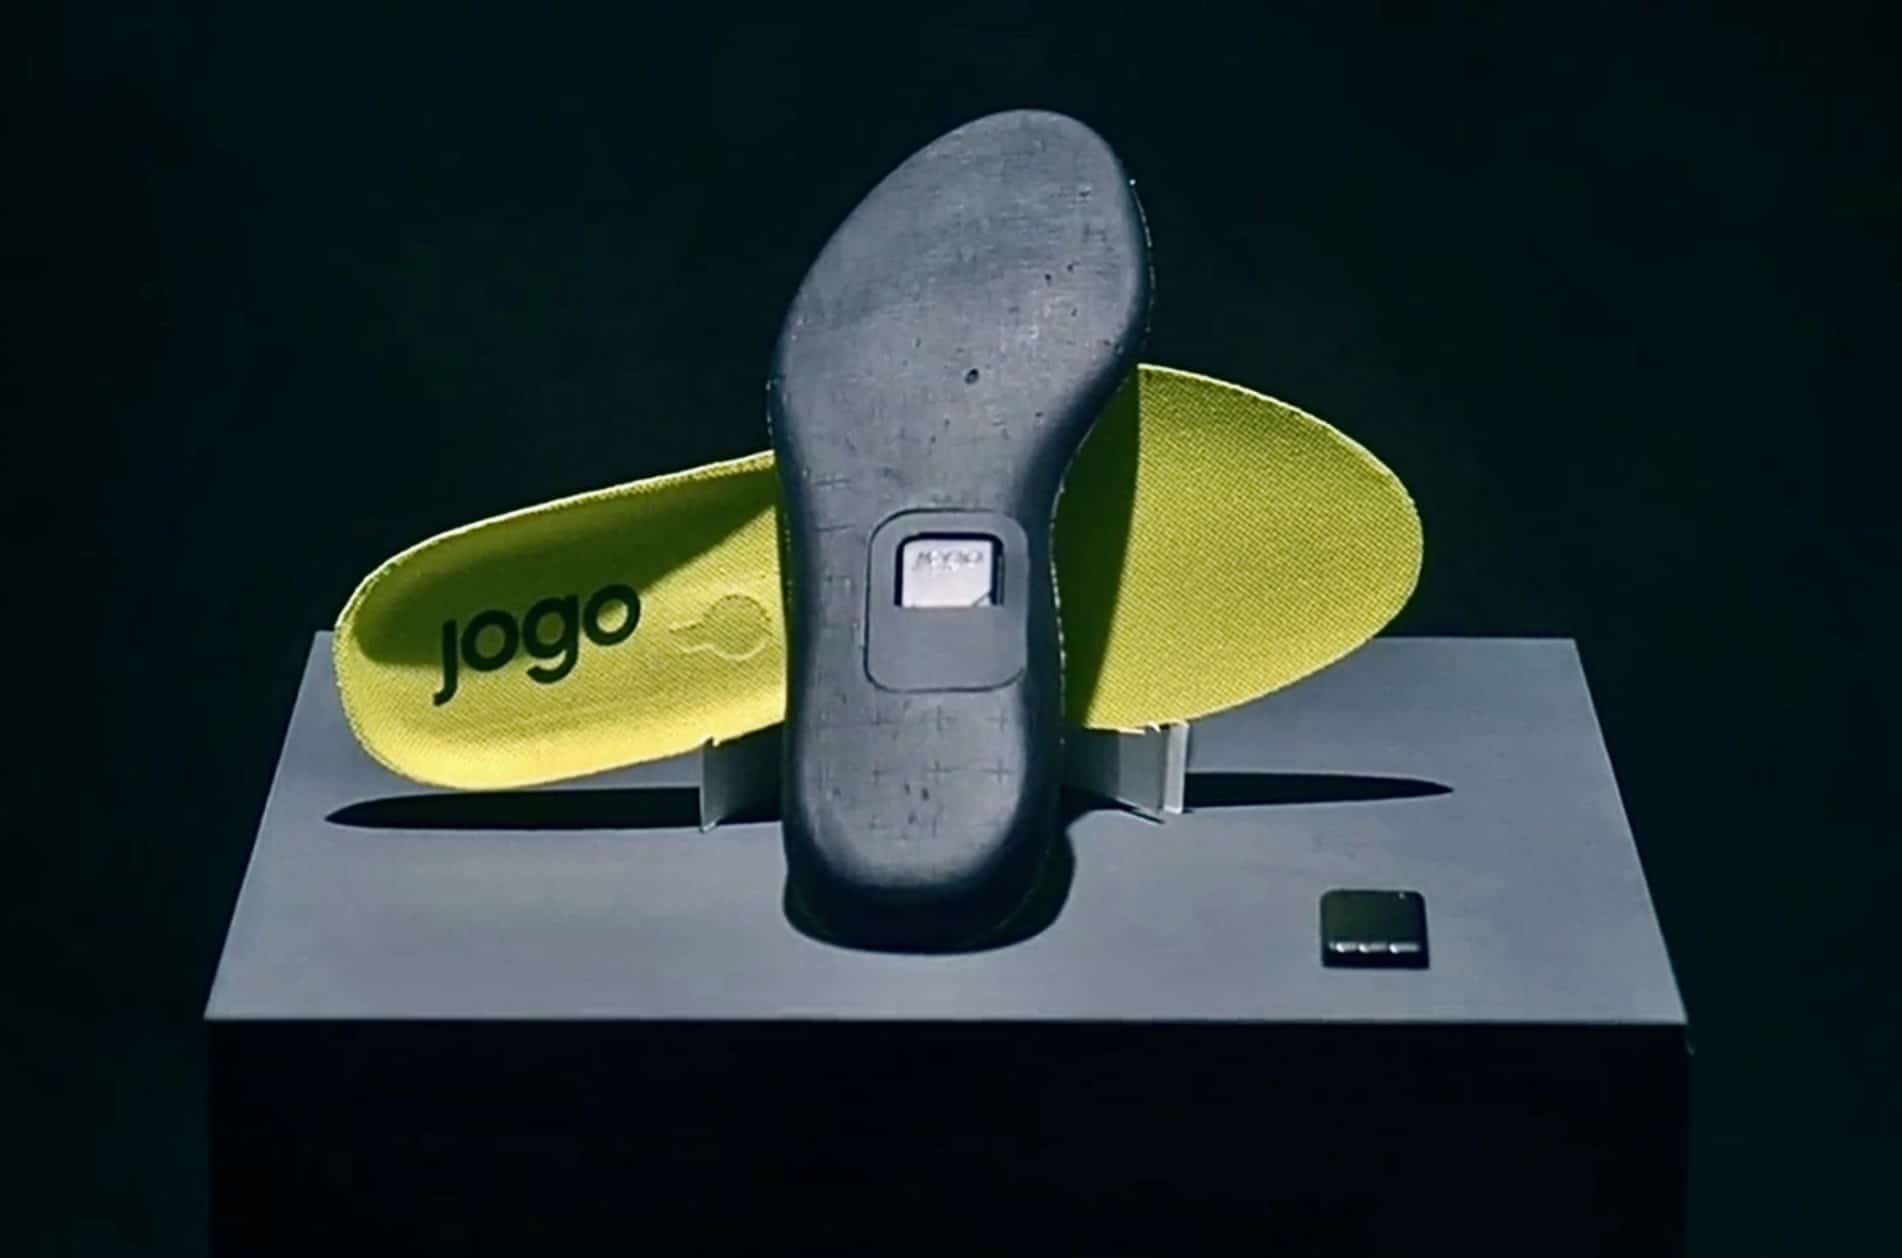 Jogo smart insoles follow the actions of footballers from the very feet